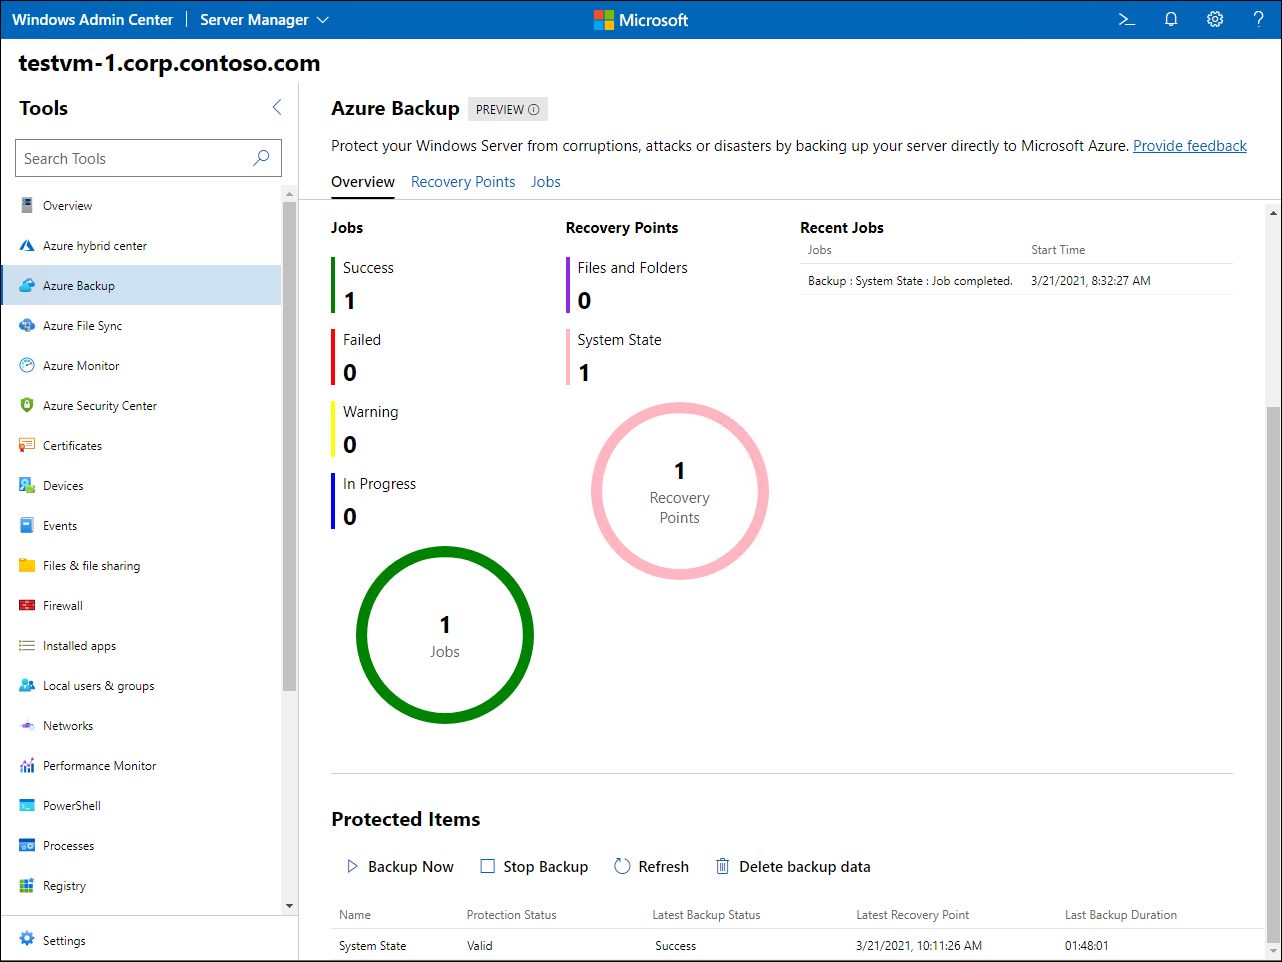 The screenshot depicts how you can use Windows Admin Center to review the backup status, trigger on-demand backups following the initial scheduled backup, track backup jobs, as well as view recovery points and recover data.